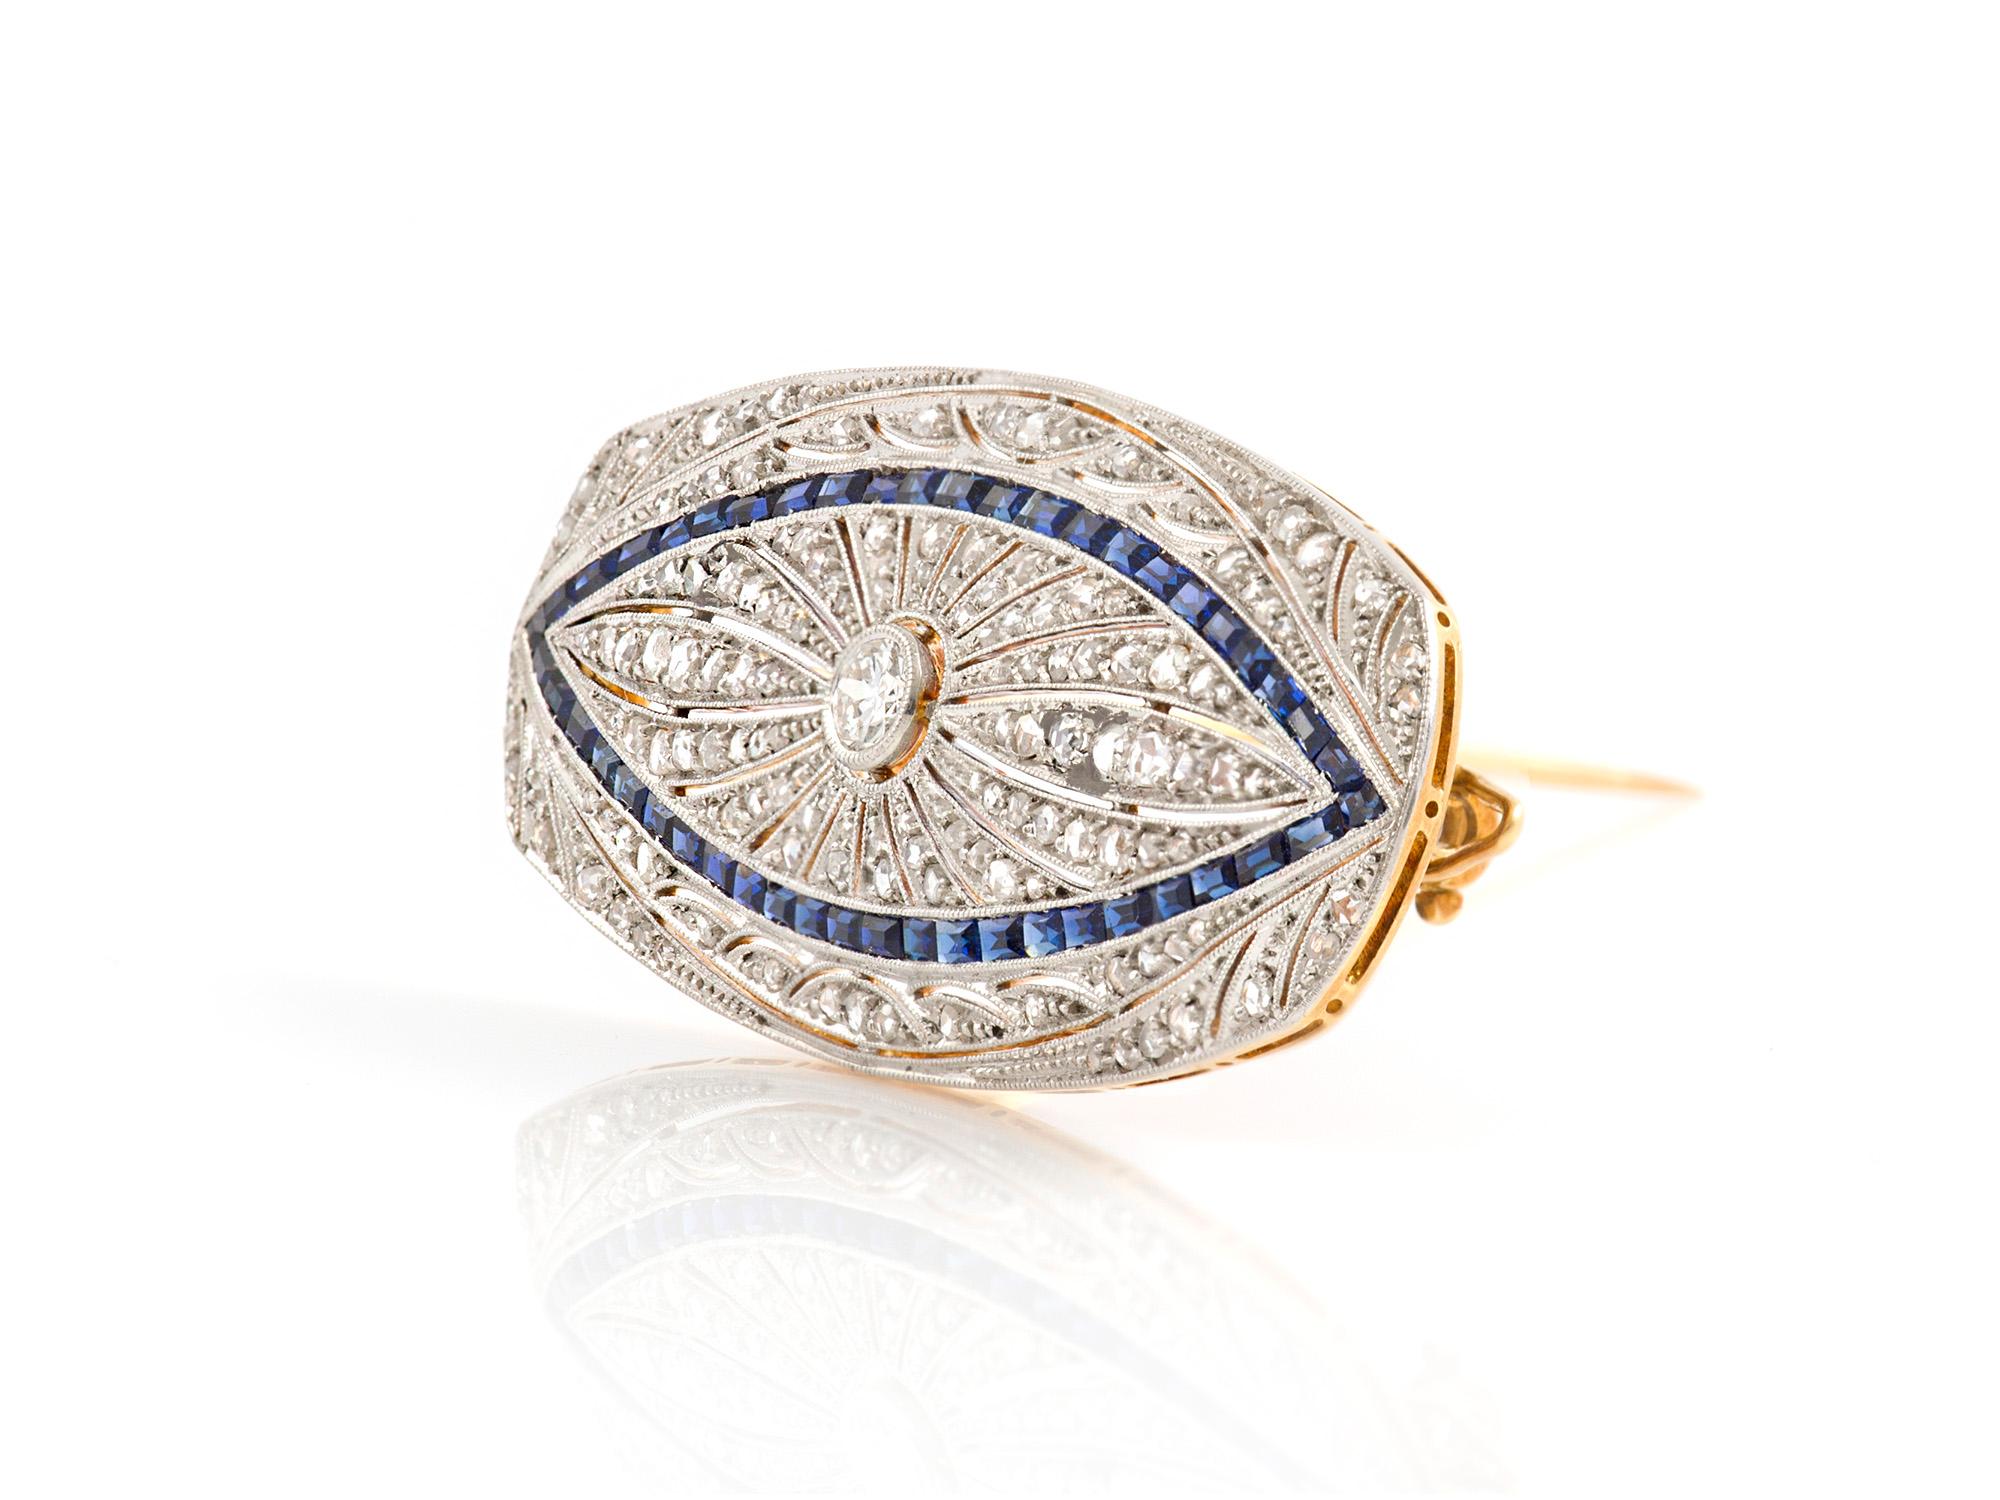 The brooch is finely crafted in 18k ywllow gold and platinum with sapphire and diamonds weighing approximately total of 2.50 carat.